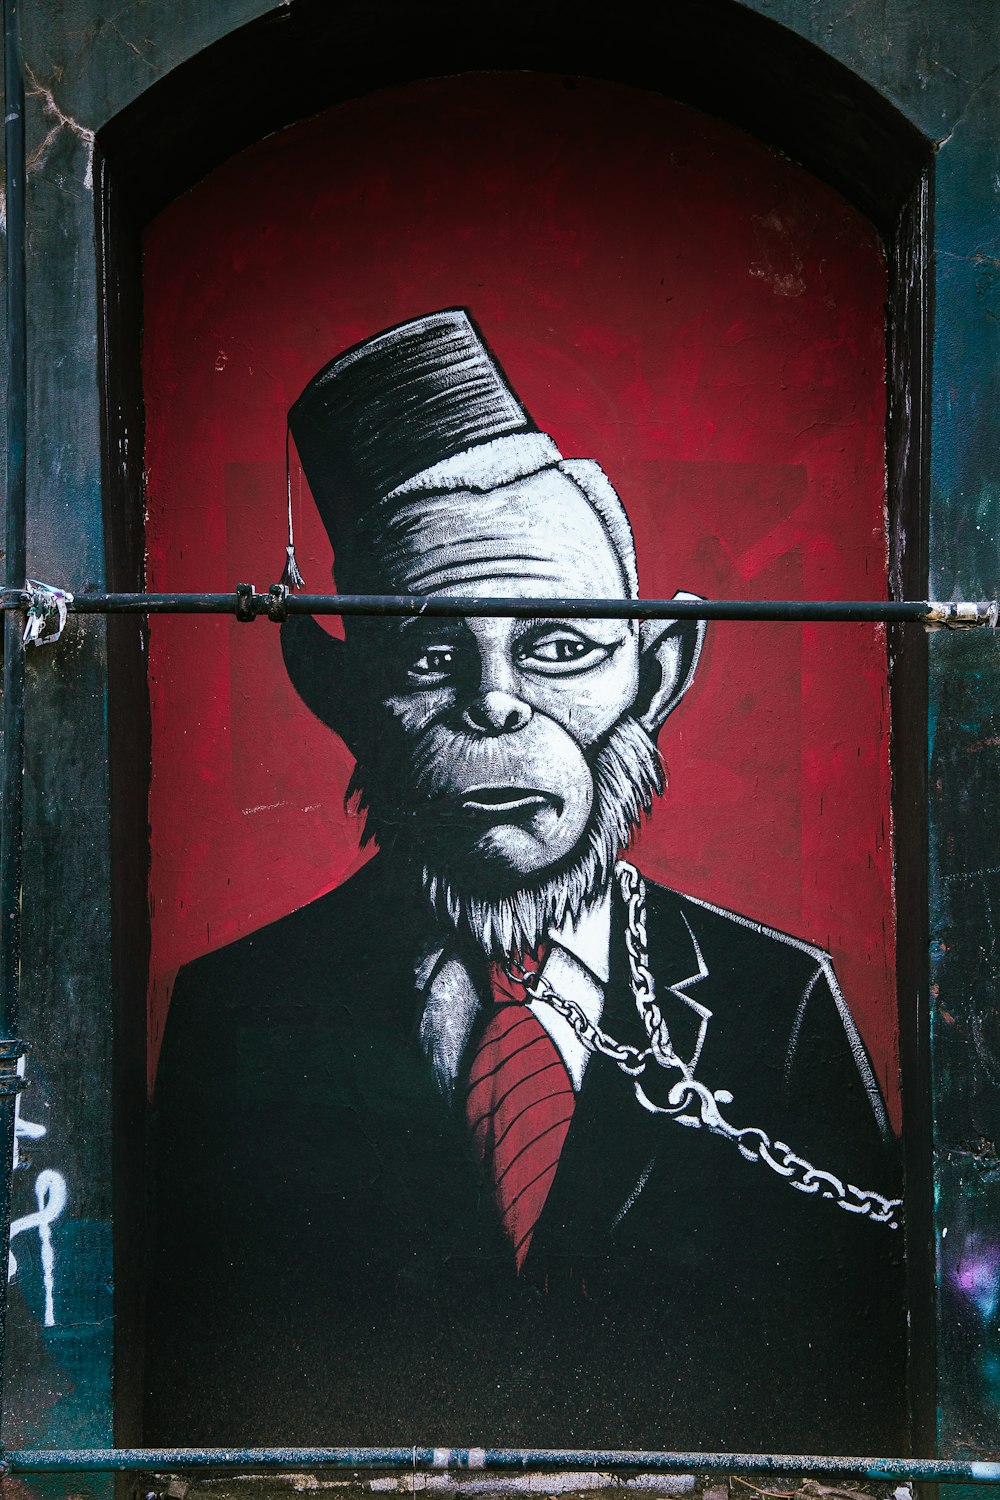 man in black knit hat and red and black suit jacket graffiti